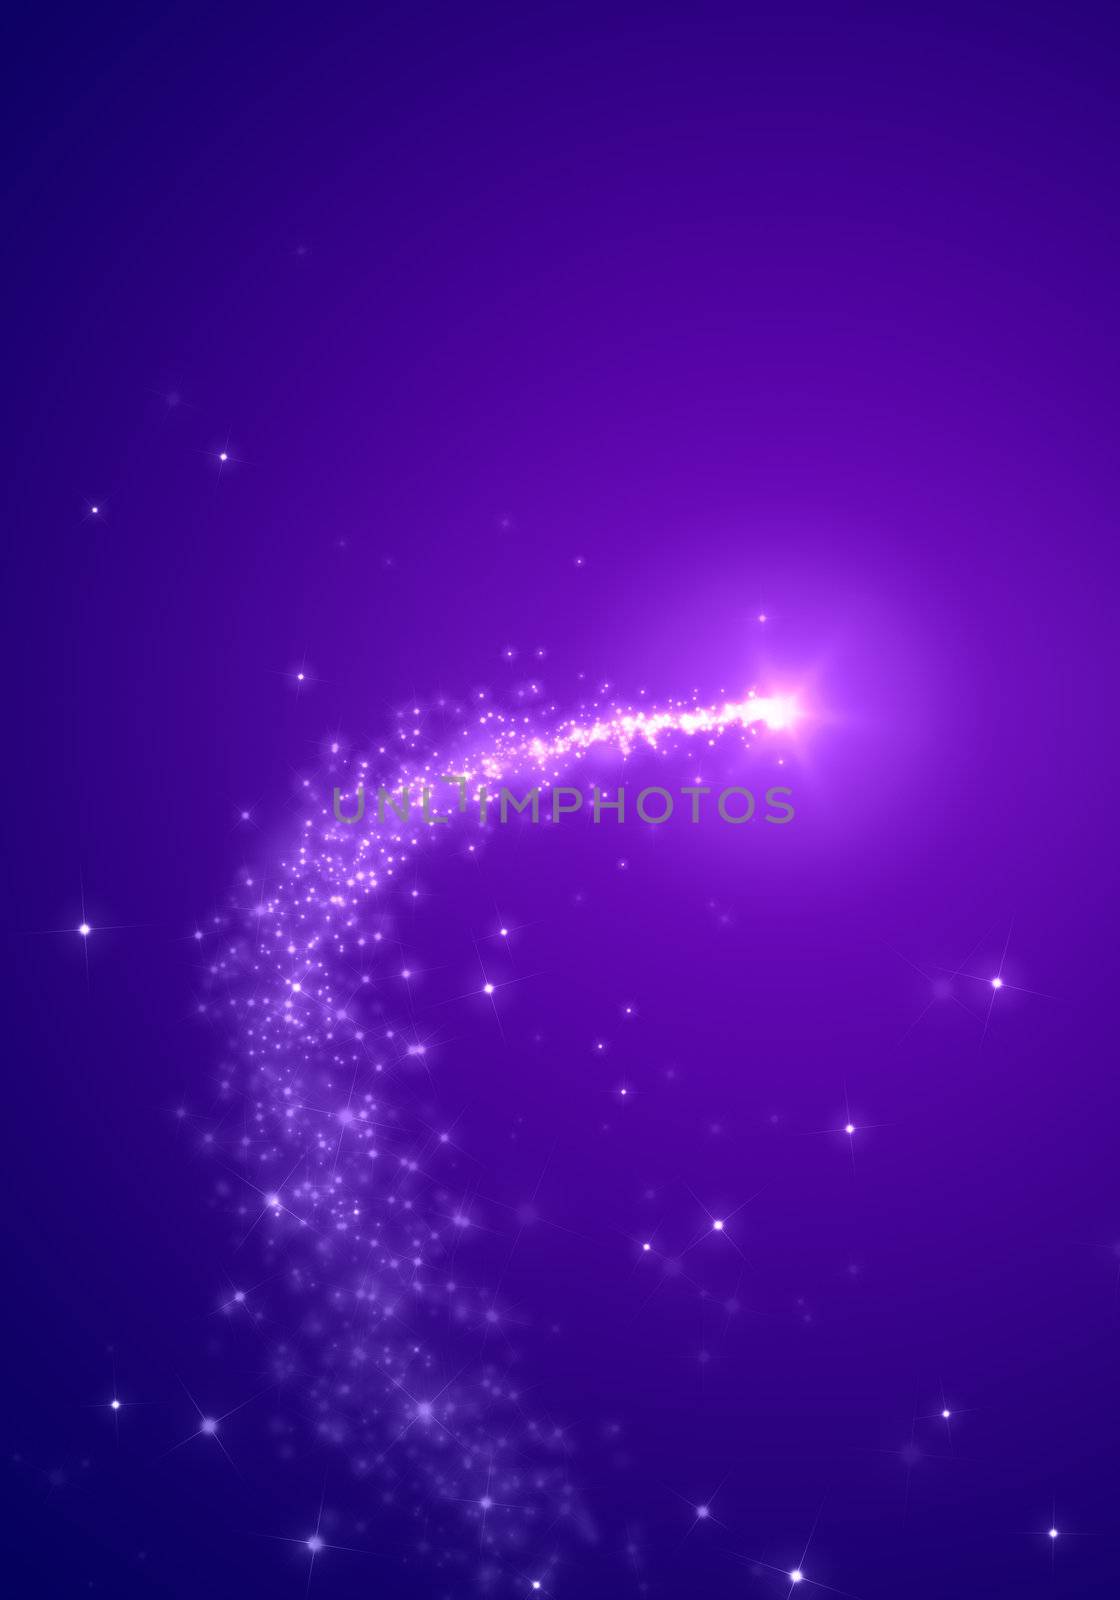 An image of a nice shooting star background